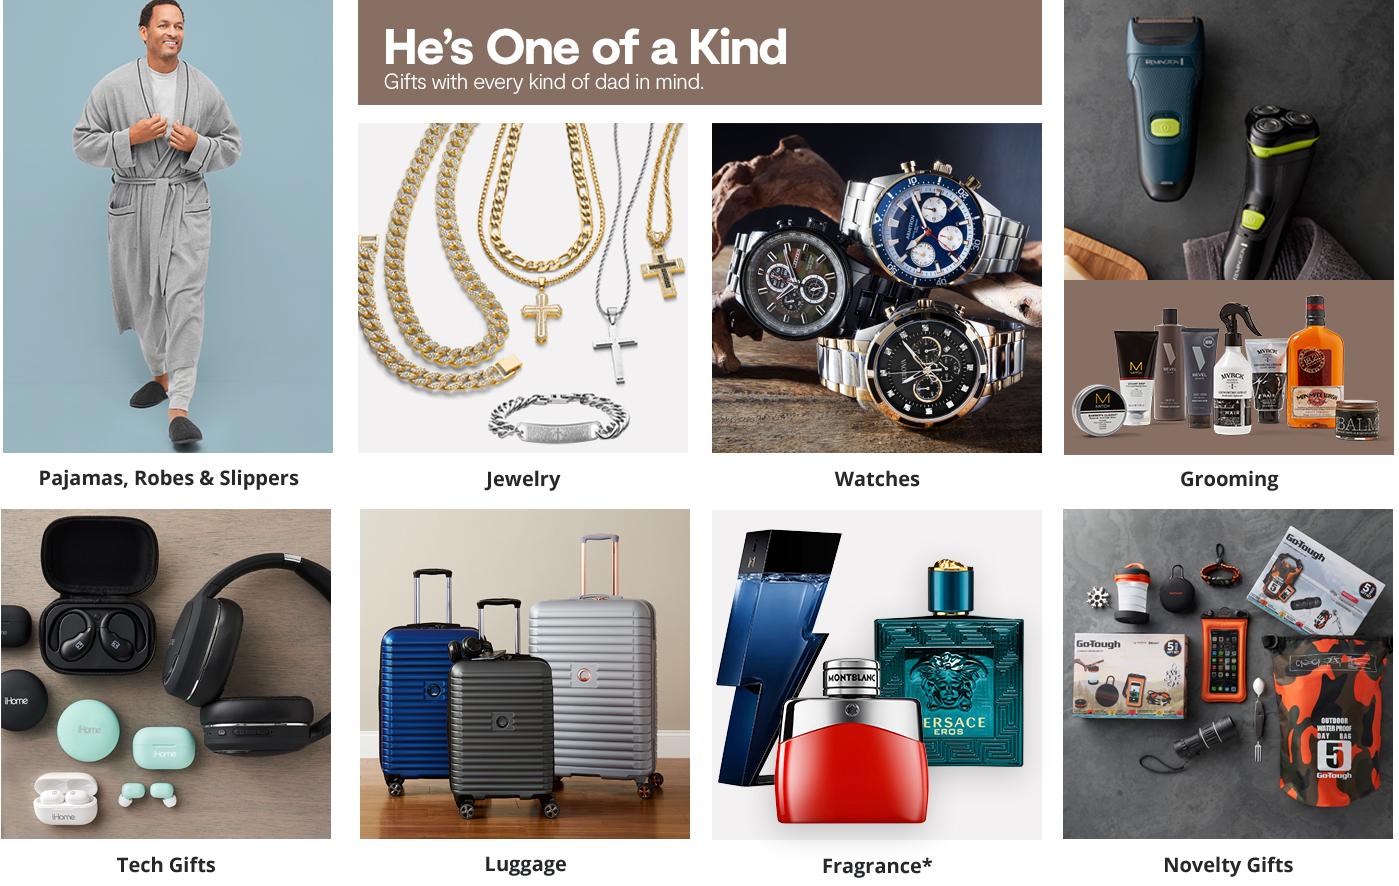 He's one of a kind gifts with every kind of dad in mind. pajama slippers robes. jewelry watches luggage tech gifts fragrance grooming novelty gifts